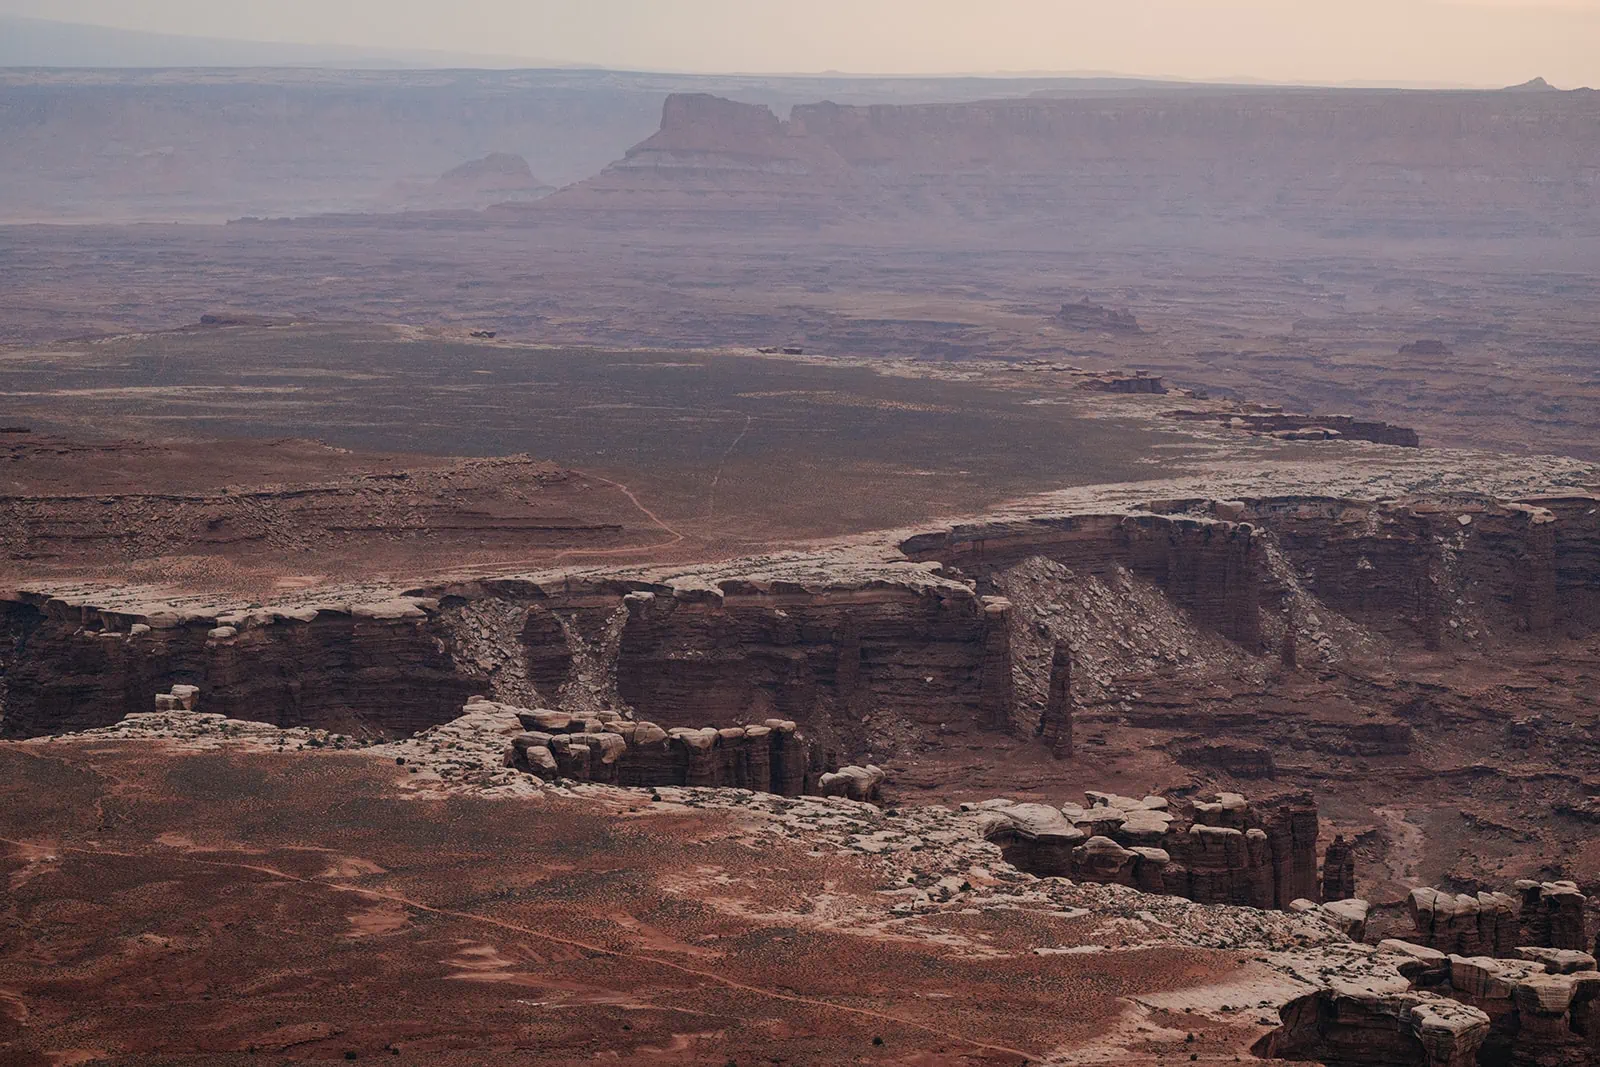 A sunrise image from a viewpoint at Canyonlands National Park